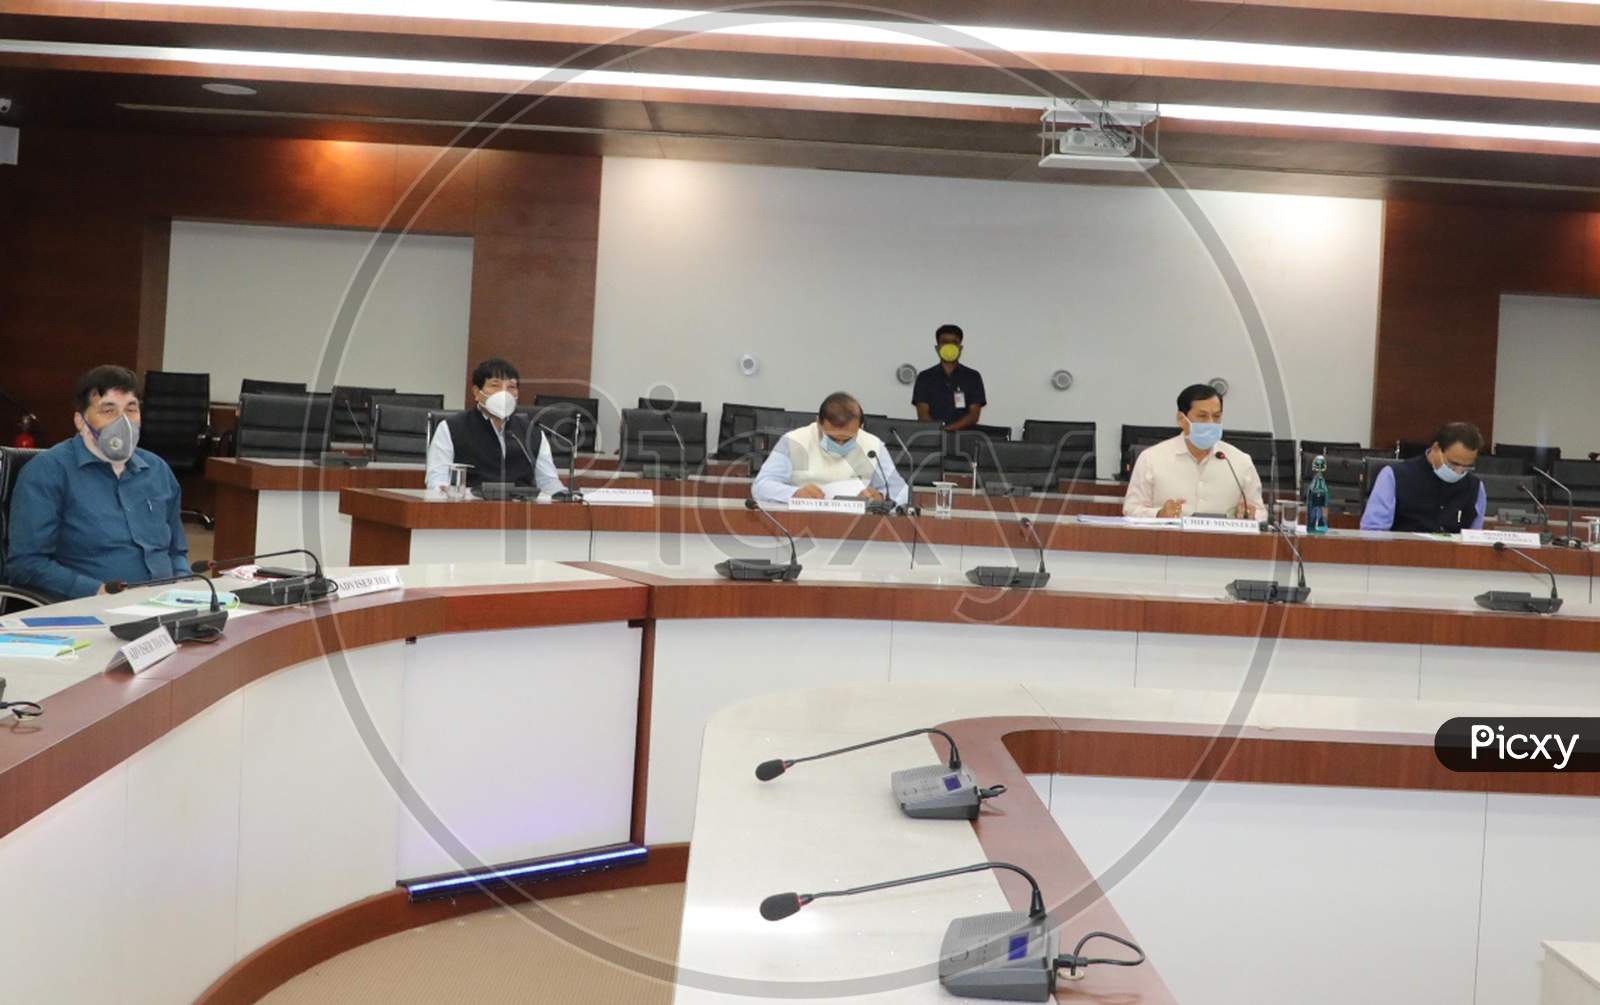 Assam Chief Minister Sarbananda Sonowal In A Meeting To Discuss Economic Issues Of State  During Nationwide Lockdown Amidst Coronavirus or COVID-19 Pandemic In Guwahati On April 28, 2020